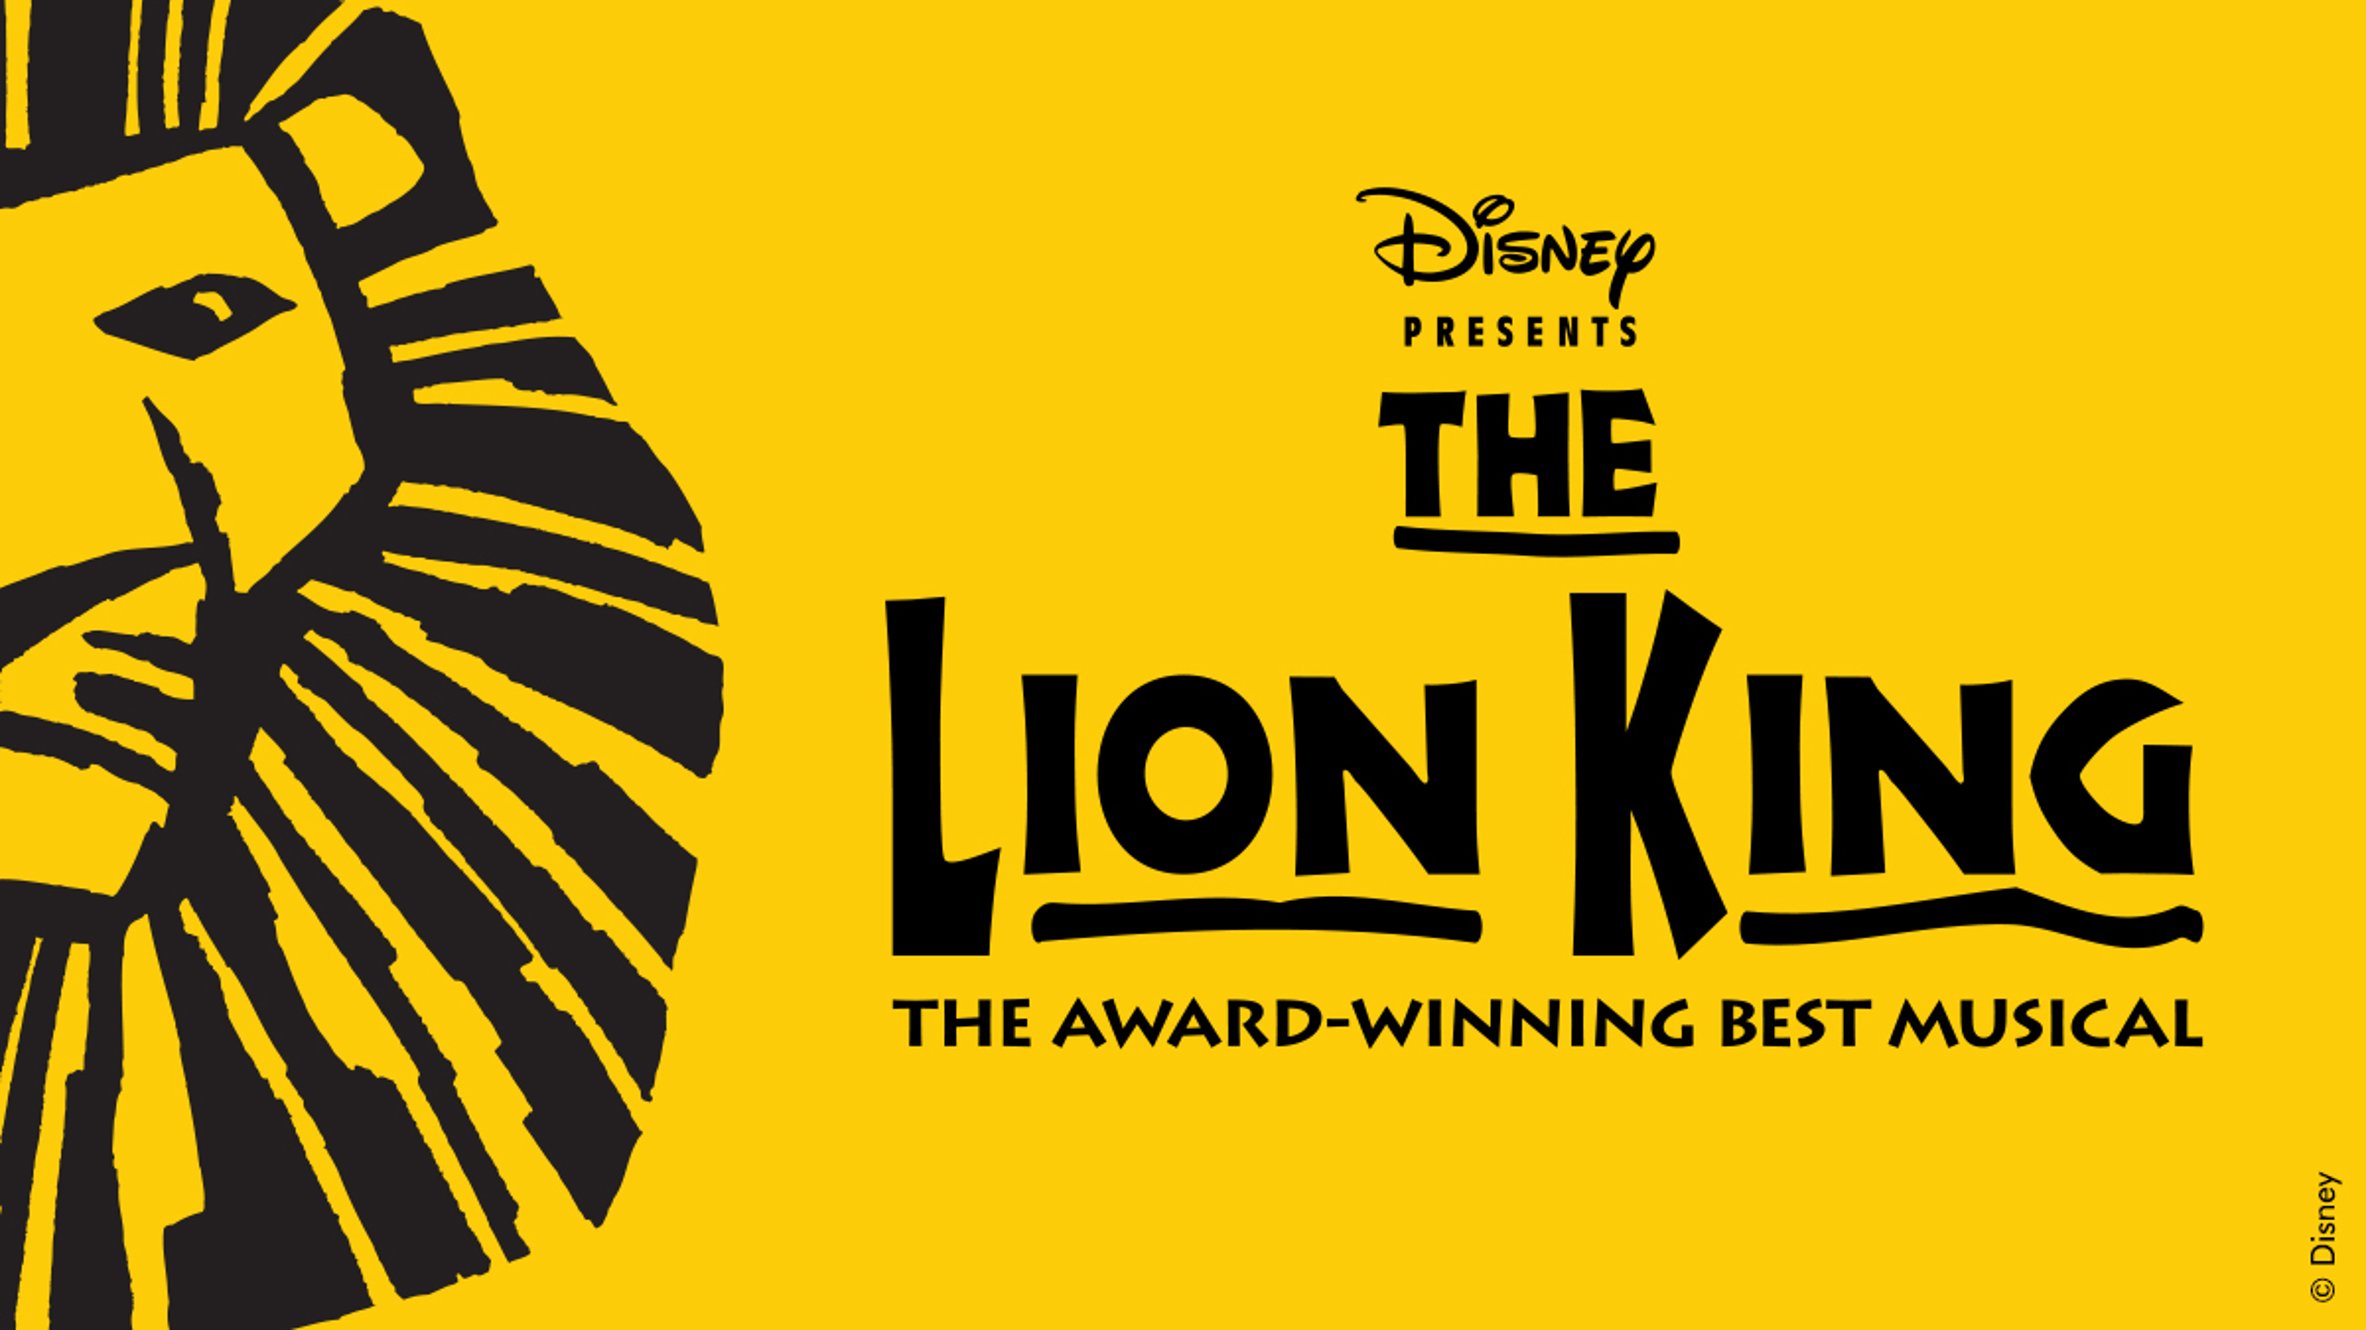 Casting Talent For Disney's The Lion King On Broadway!